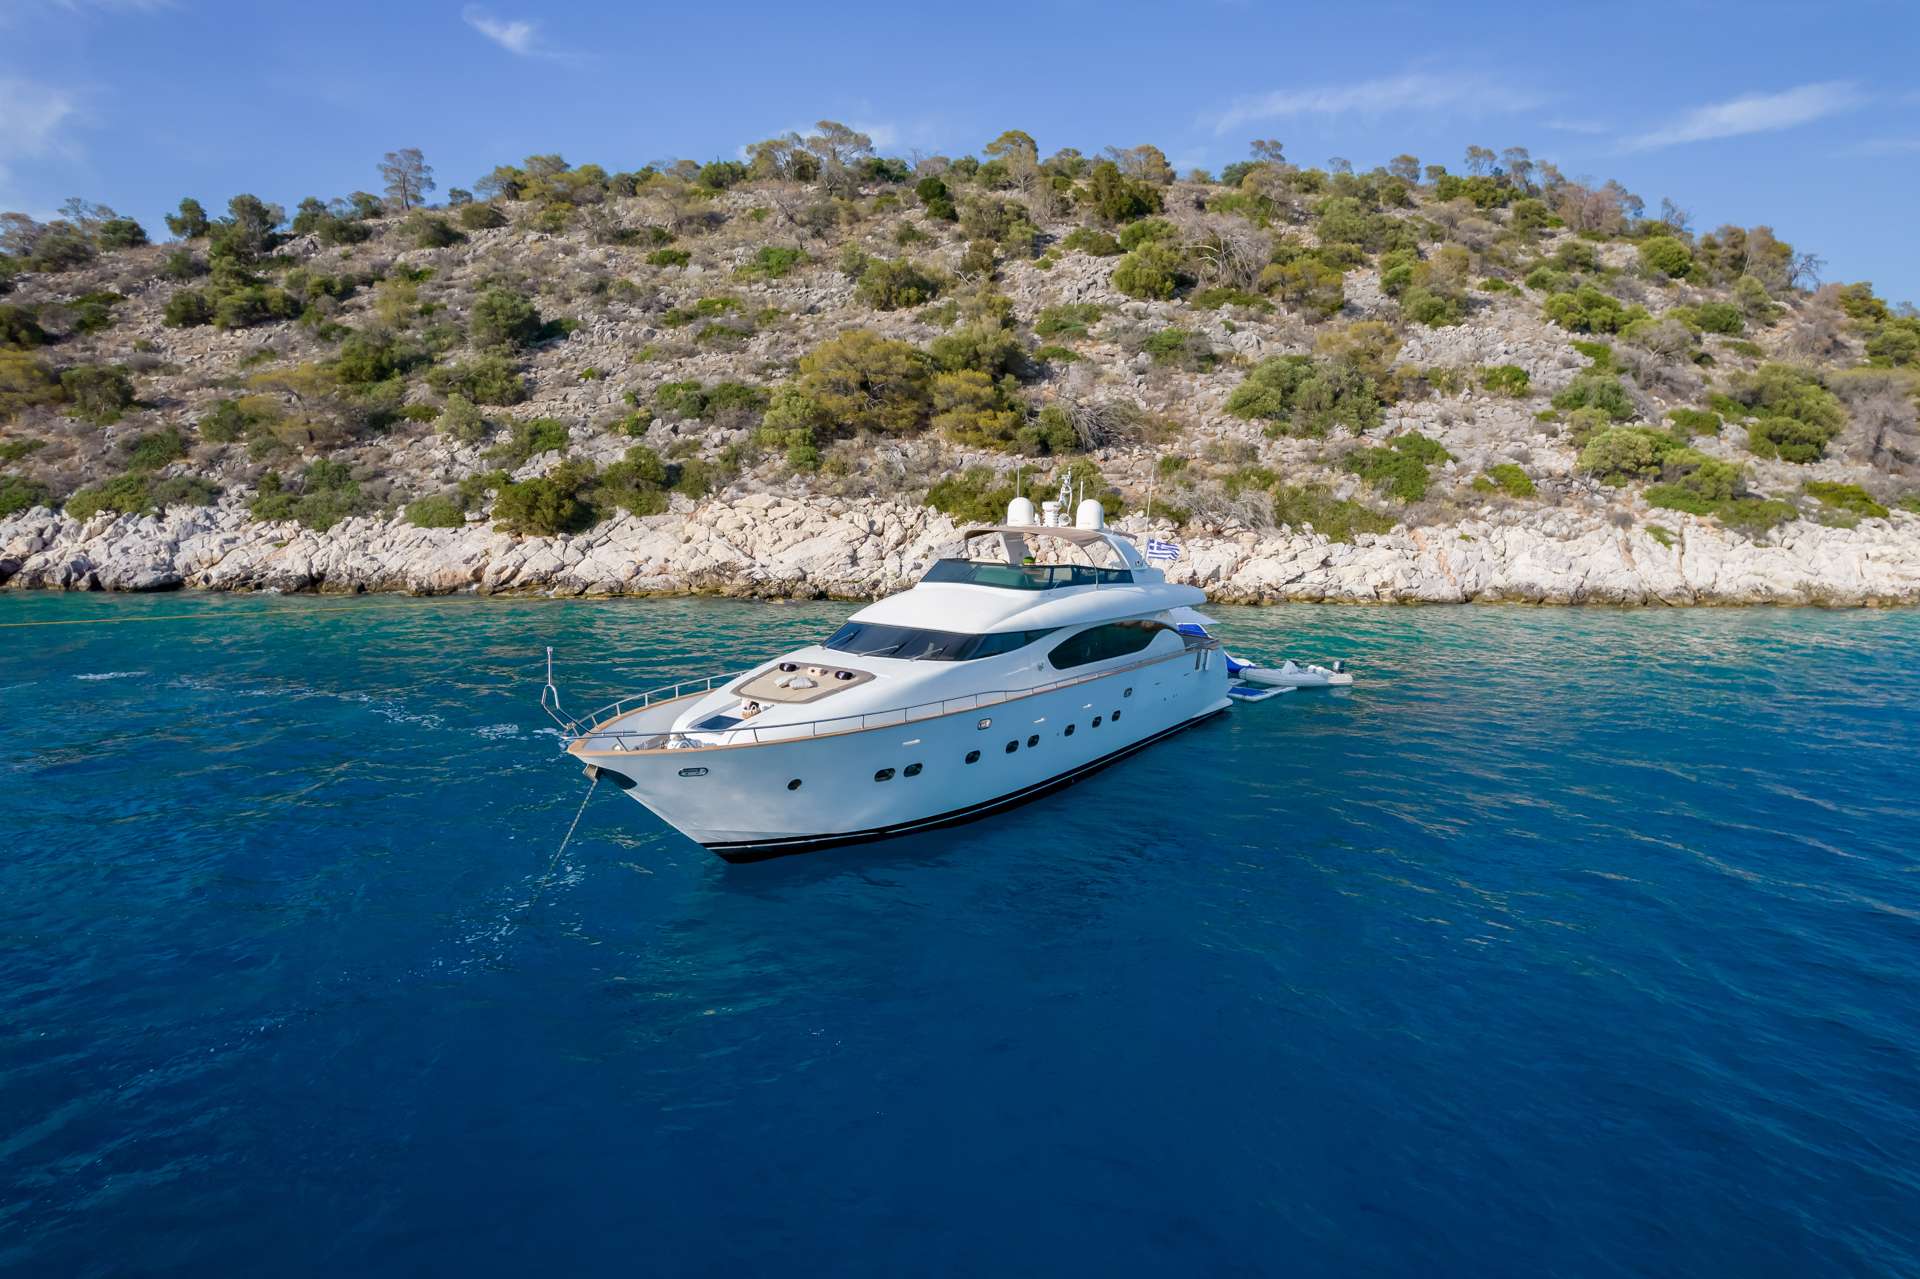 COOKIE - Yacht Charter Thasos & Boat hire in Greece & Turkey 1